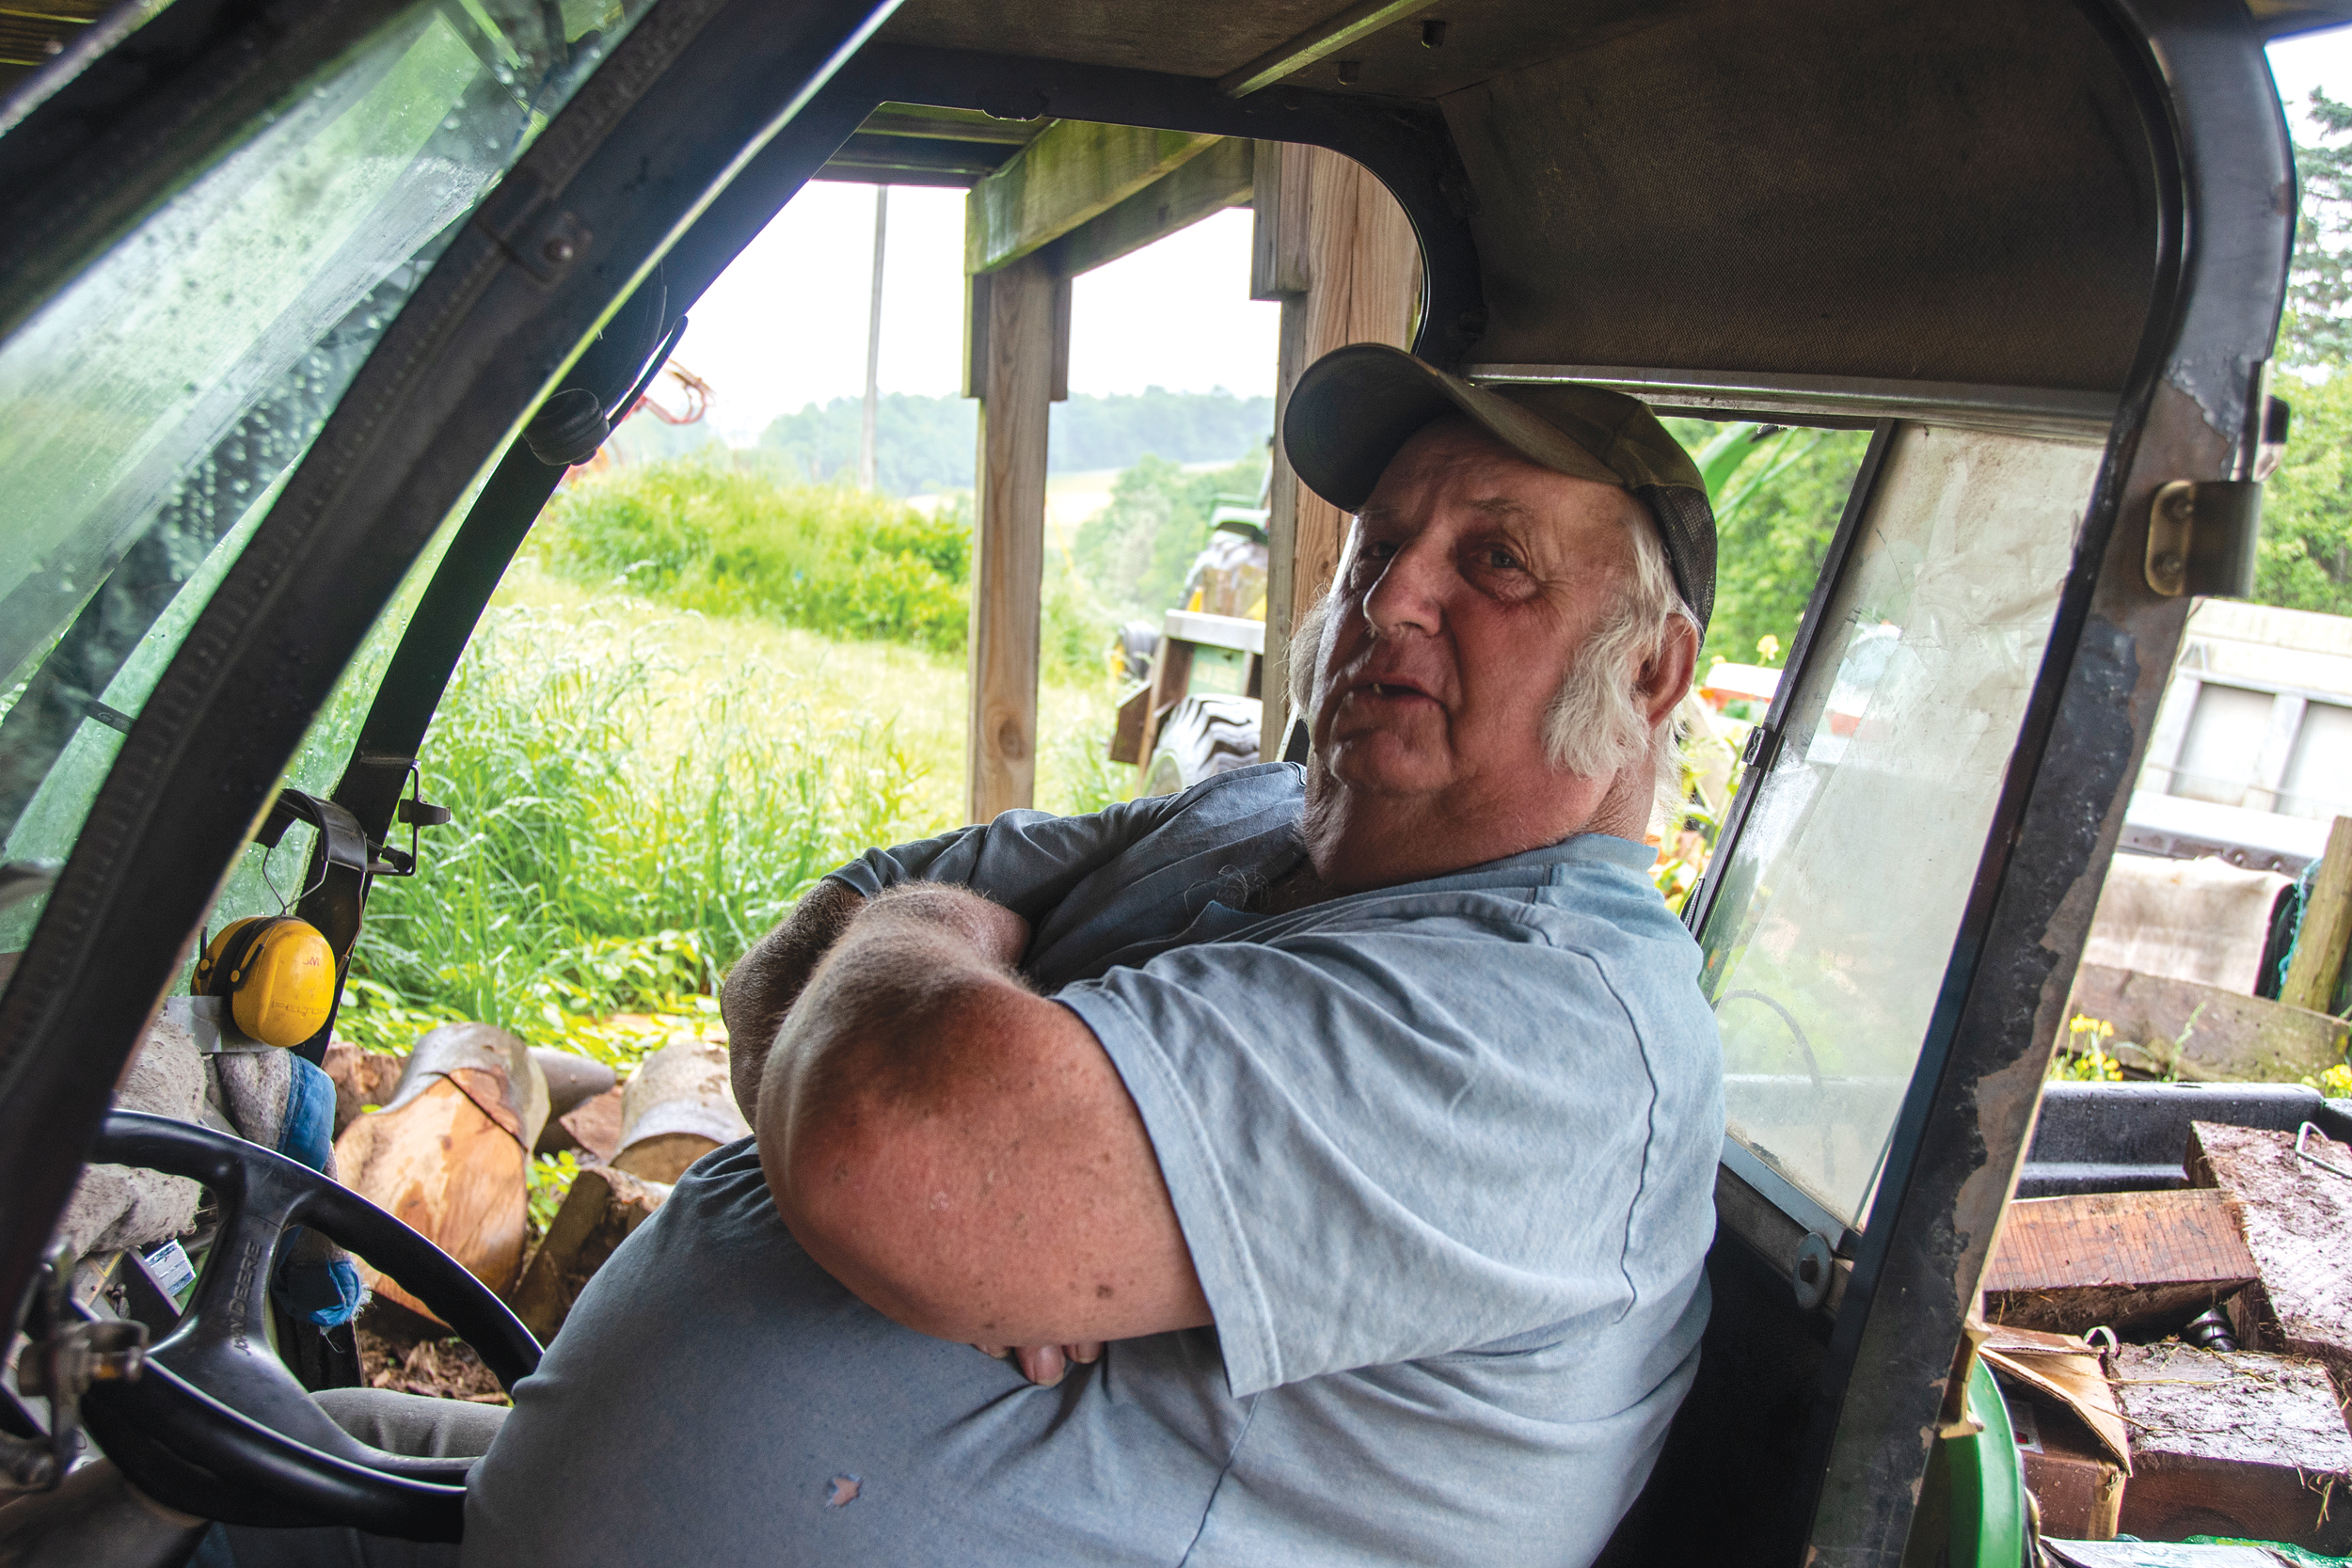 A MEANINGFUL TOOL: Richard Coughenour, former owner of Little Piney Farm in Salisbury and member of Somerset Rural Electric Cooperative, sits in a utility all-terrain vehicle he uses to move around his farm and avoid putting undue strain on his back and knees.